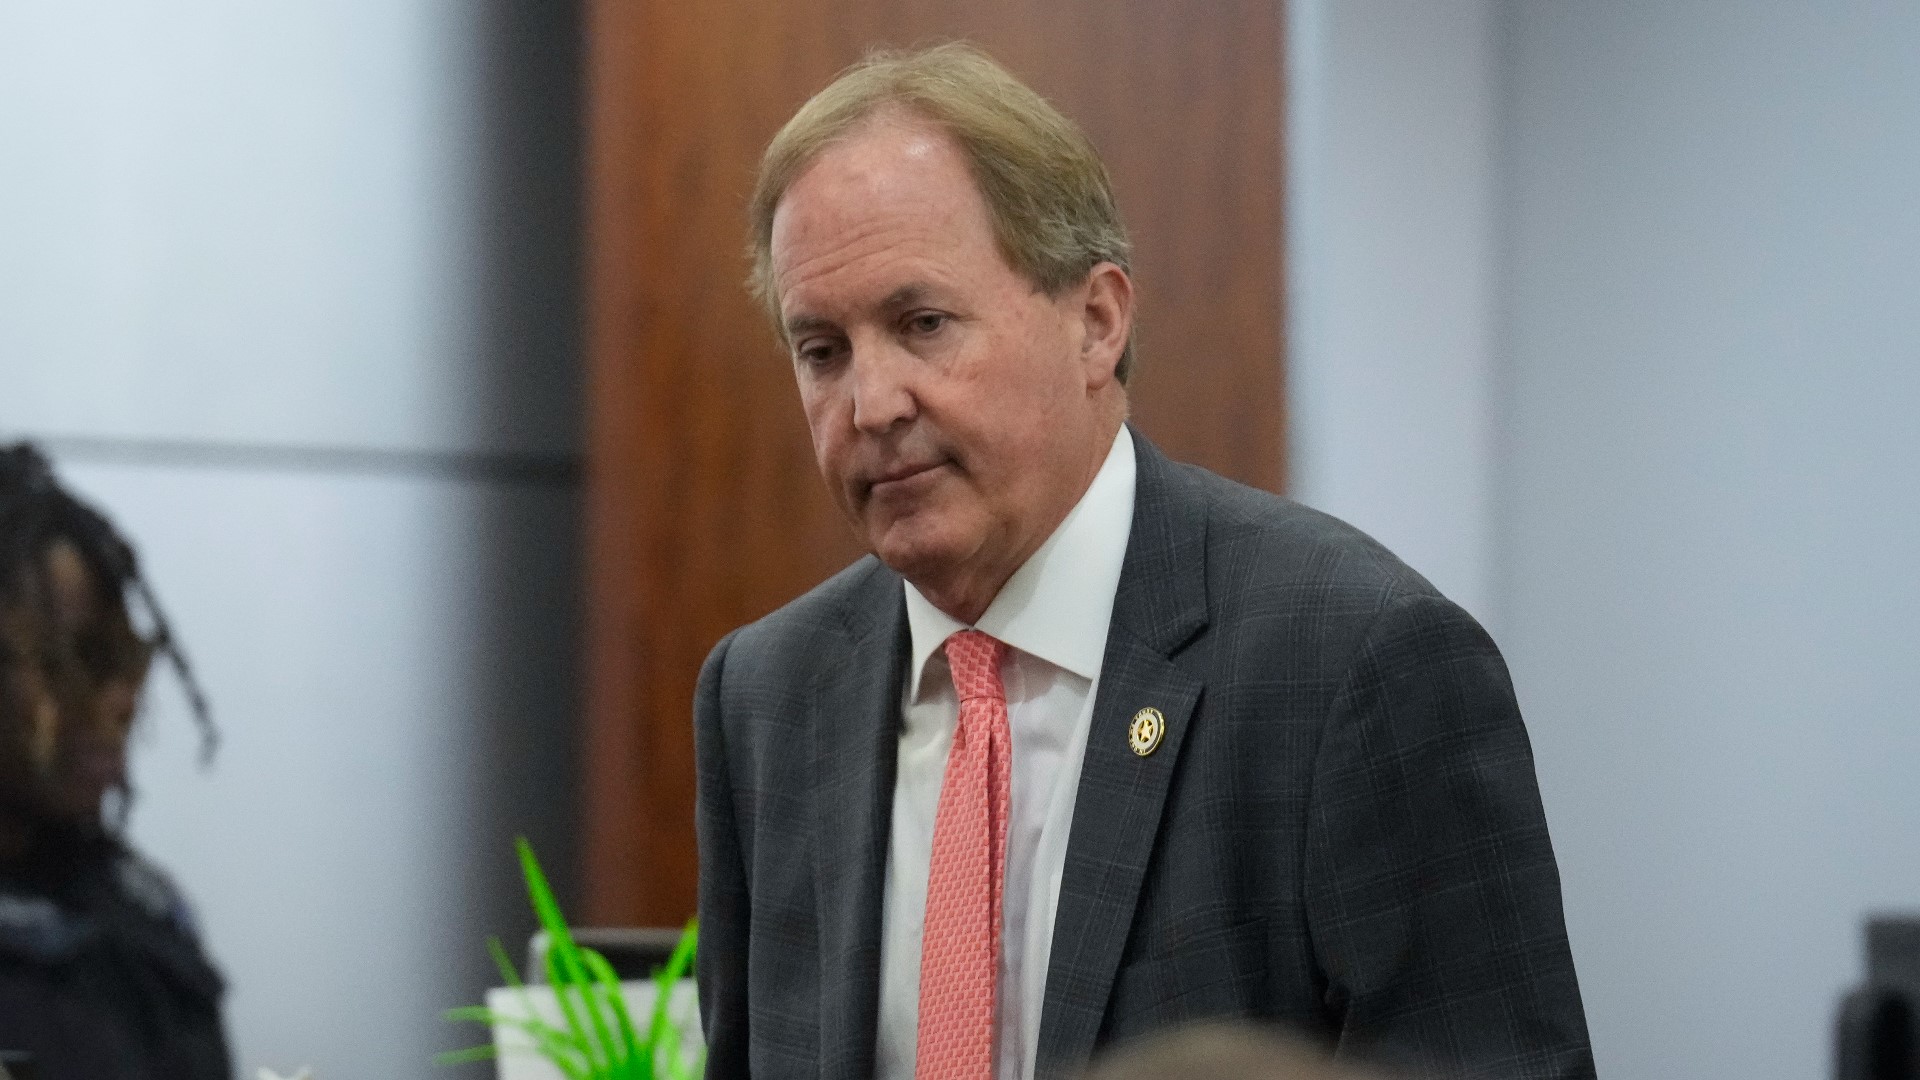 Paxton will have to complete 100 hours of community service and 15 hours of legal ethics classes and he has to pay around $300,000 in restitution.